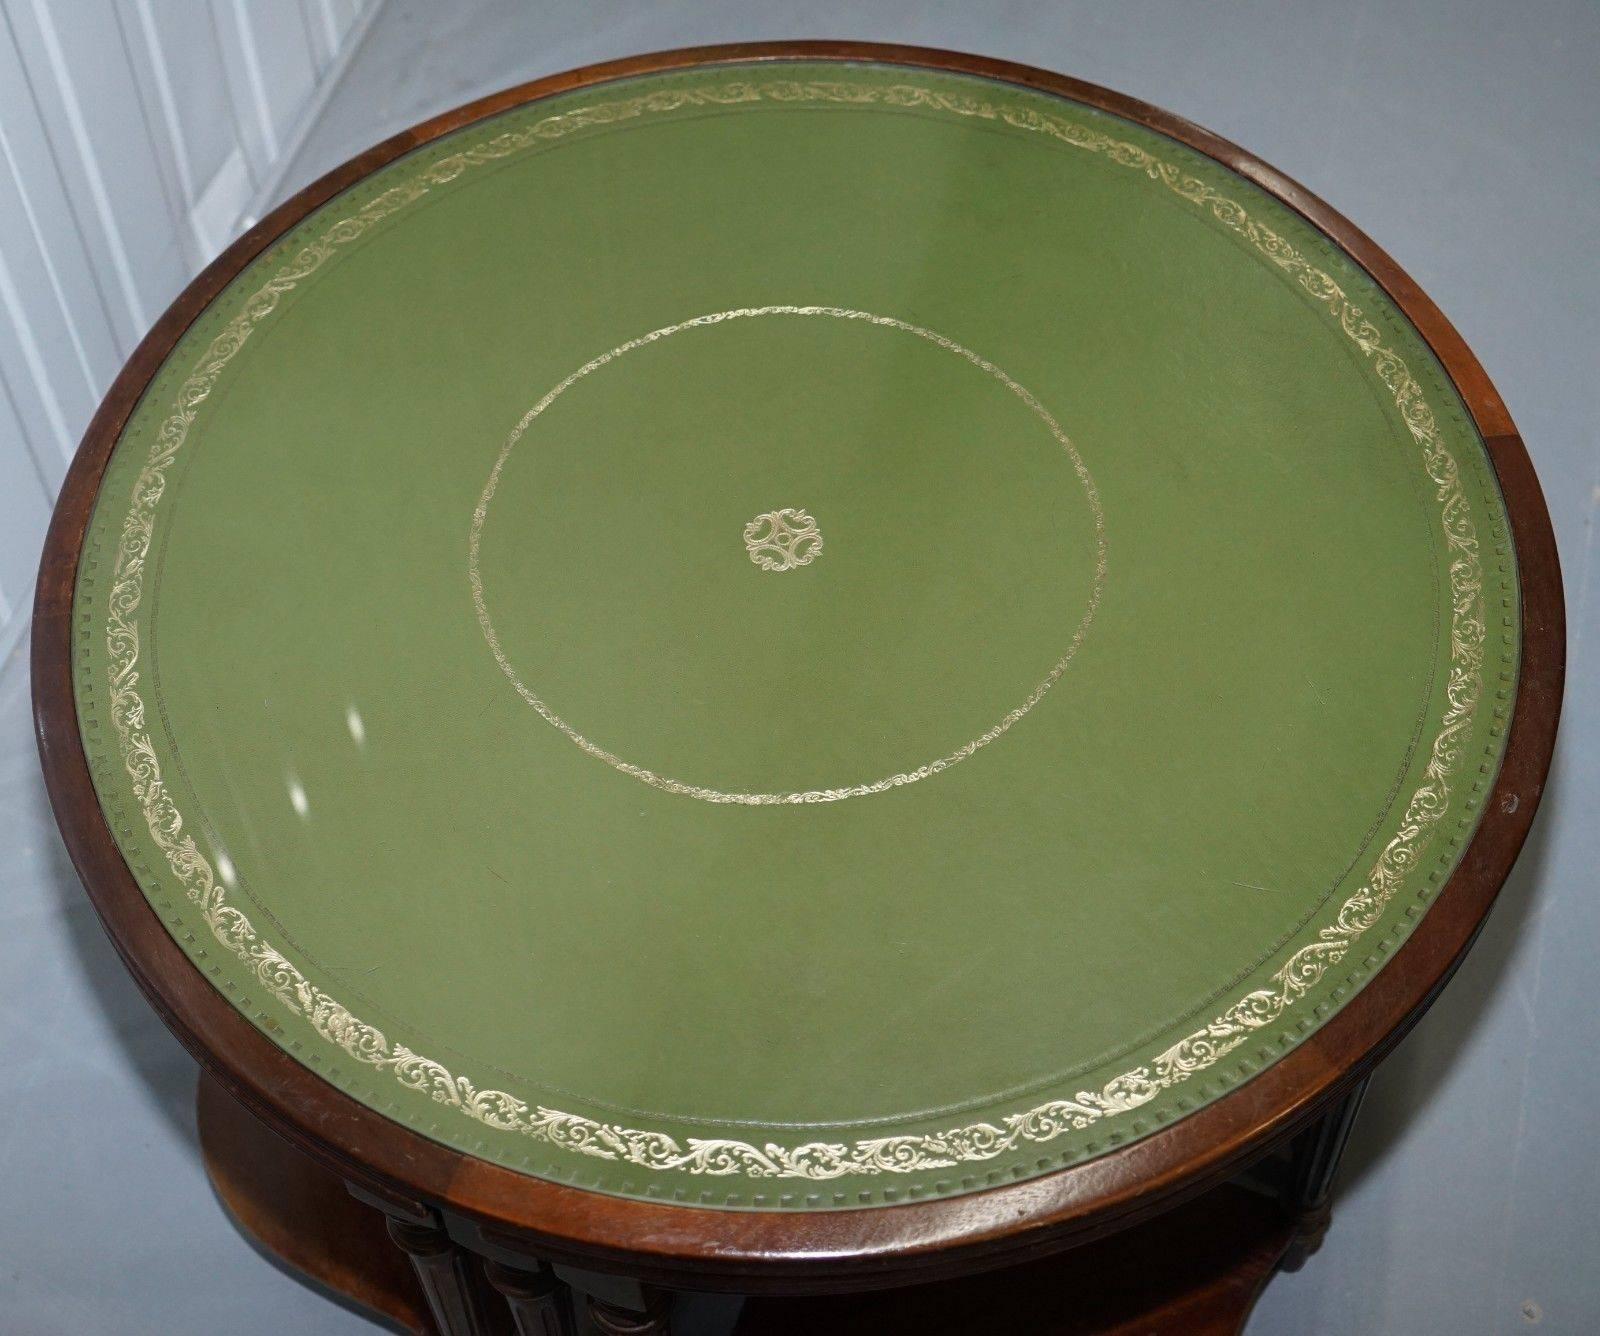 We are delighted to offer for sale this Regency style aged green leather topped coffee table with nested tables under

A very good looking and well-made piece in period condition which is to say some patina marks all over, structurally its